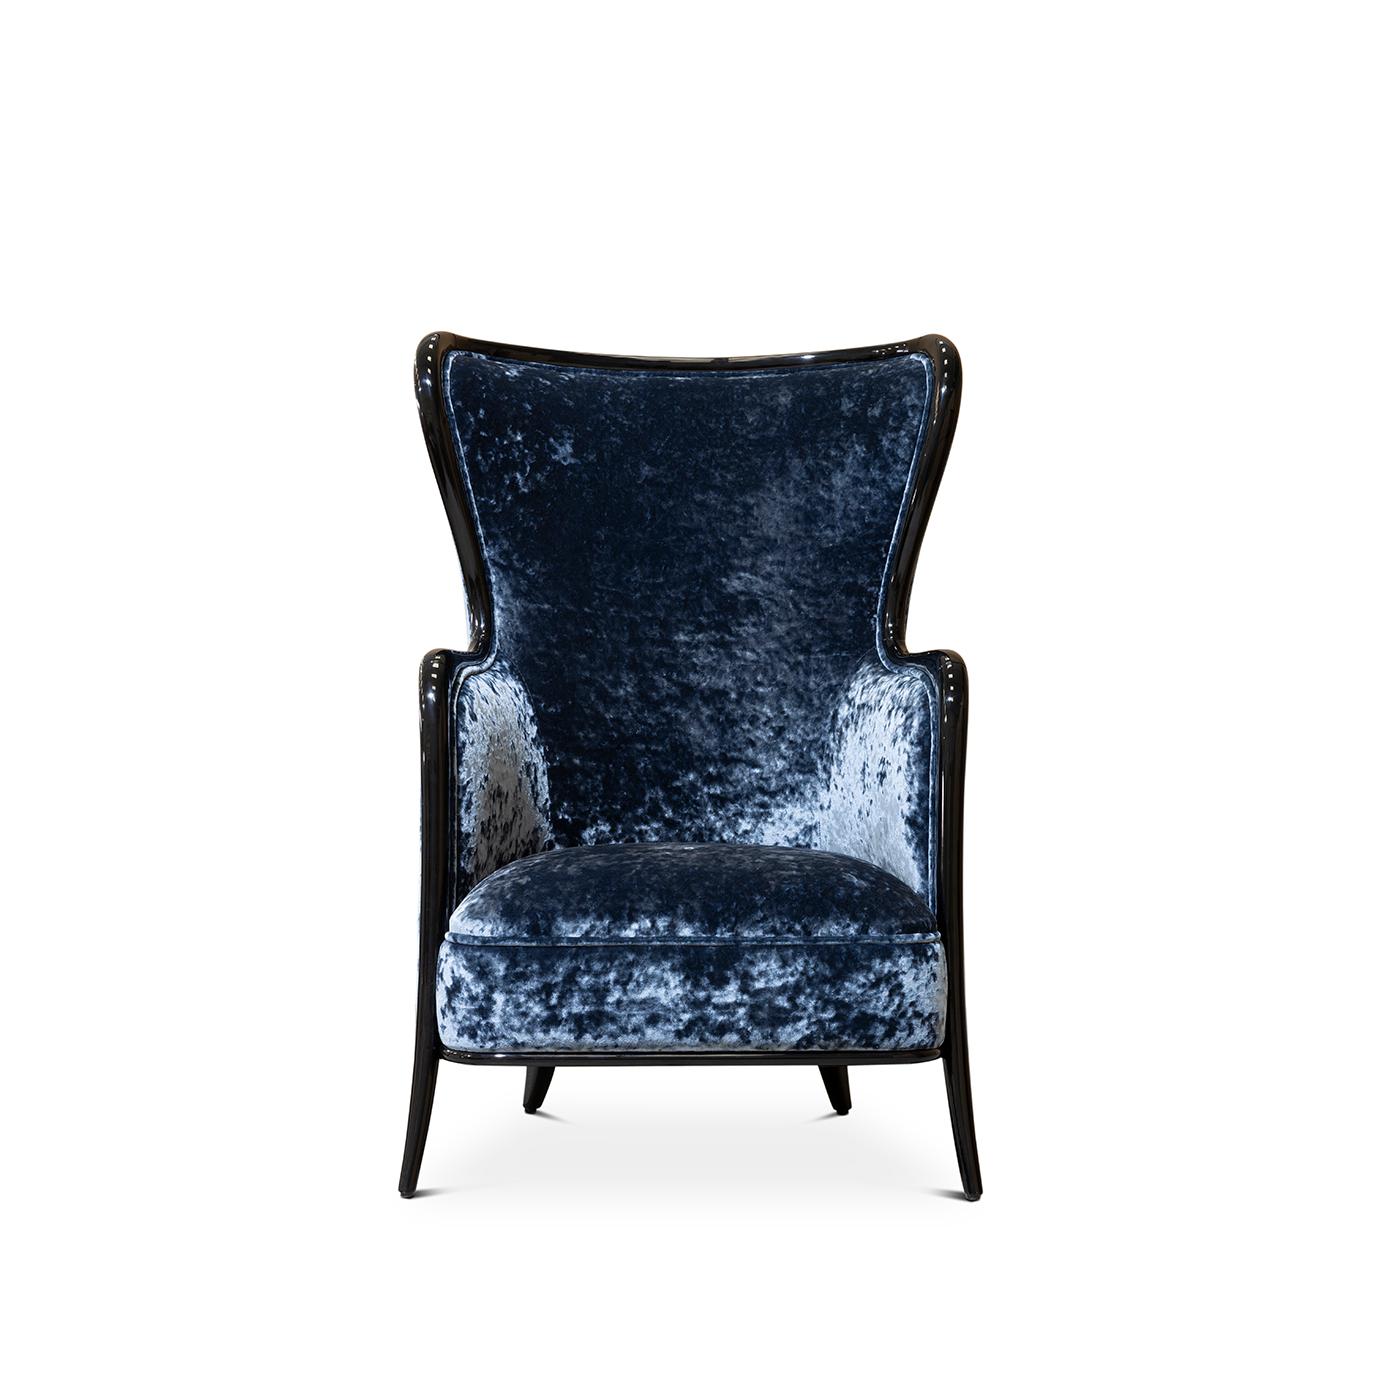 A chic and comfortable occasional chair, the Nudesse High-back is beautifully upholstered in a luxurious blue velvet and elegantly trimmed in black lacquered wood.